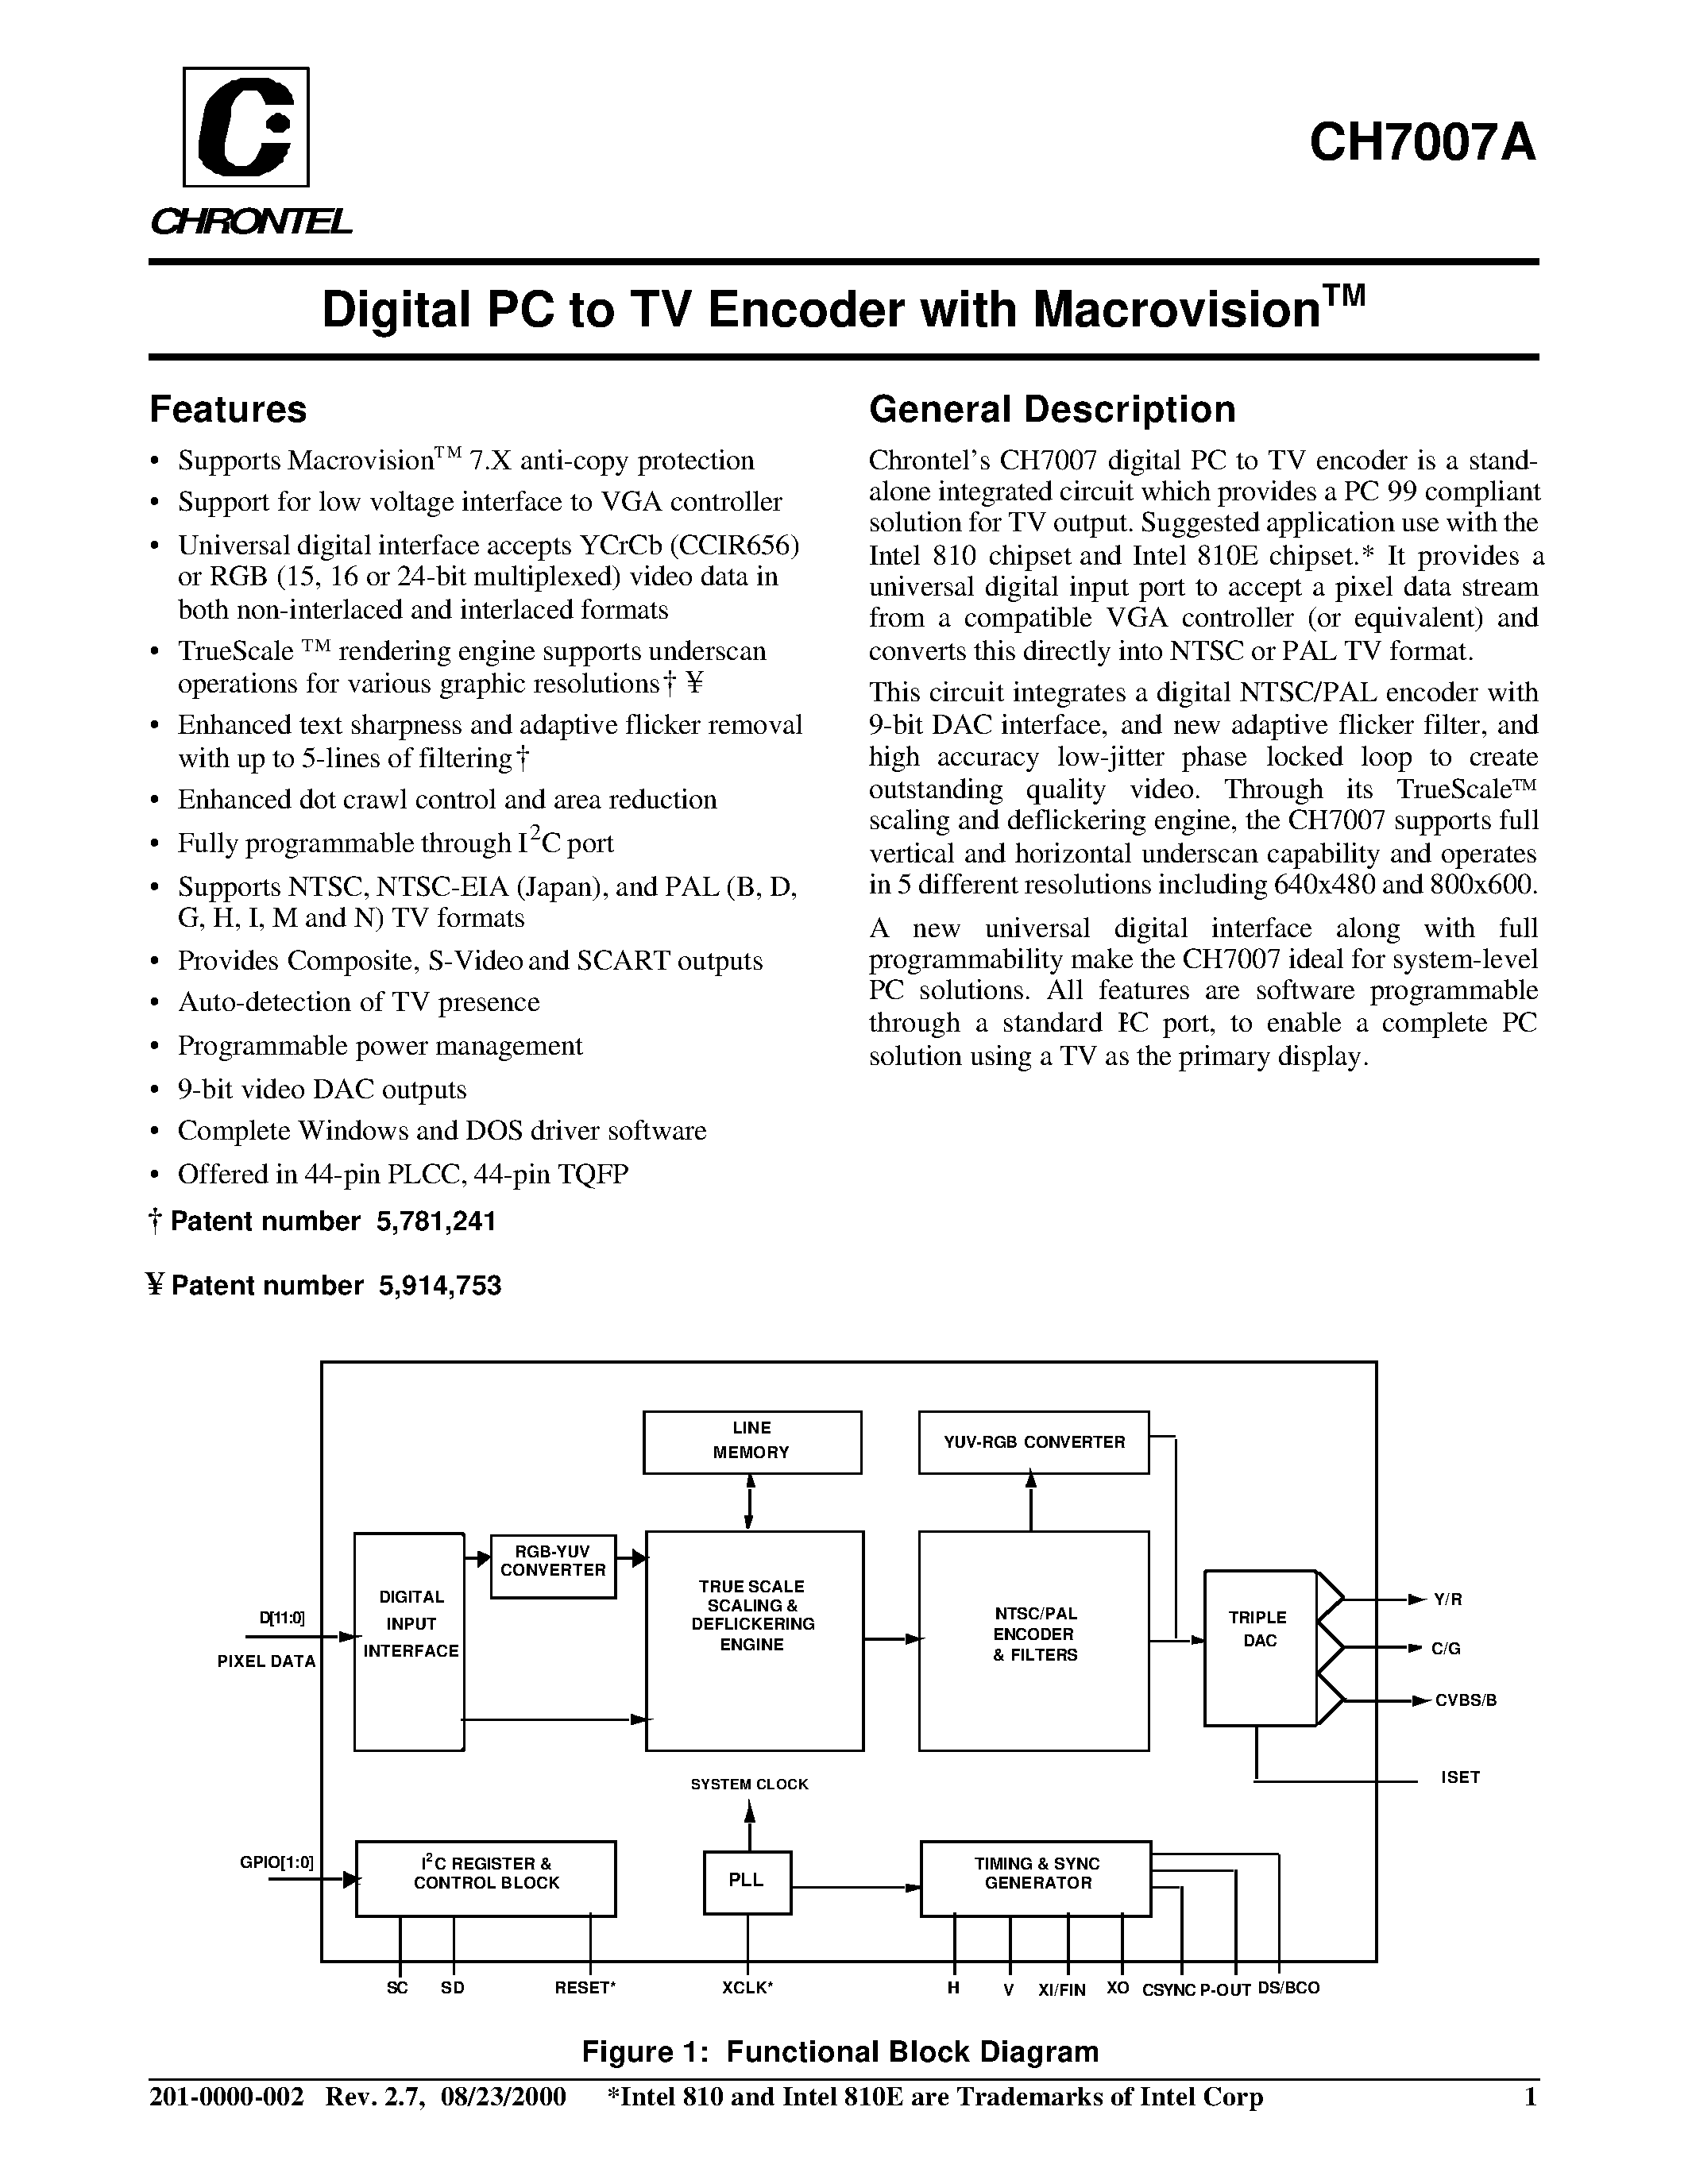 Datasheet CH7007A-V - DIGITAL PC TO TV ENCODER WITH MACROVISION page 1